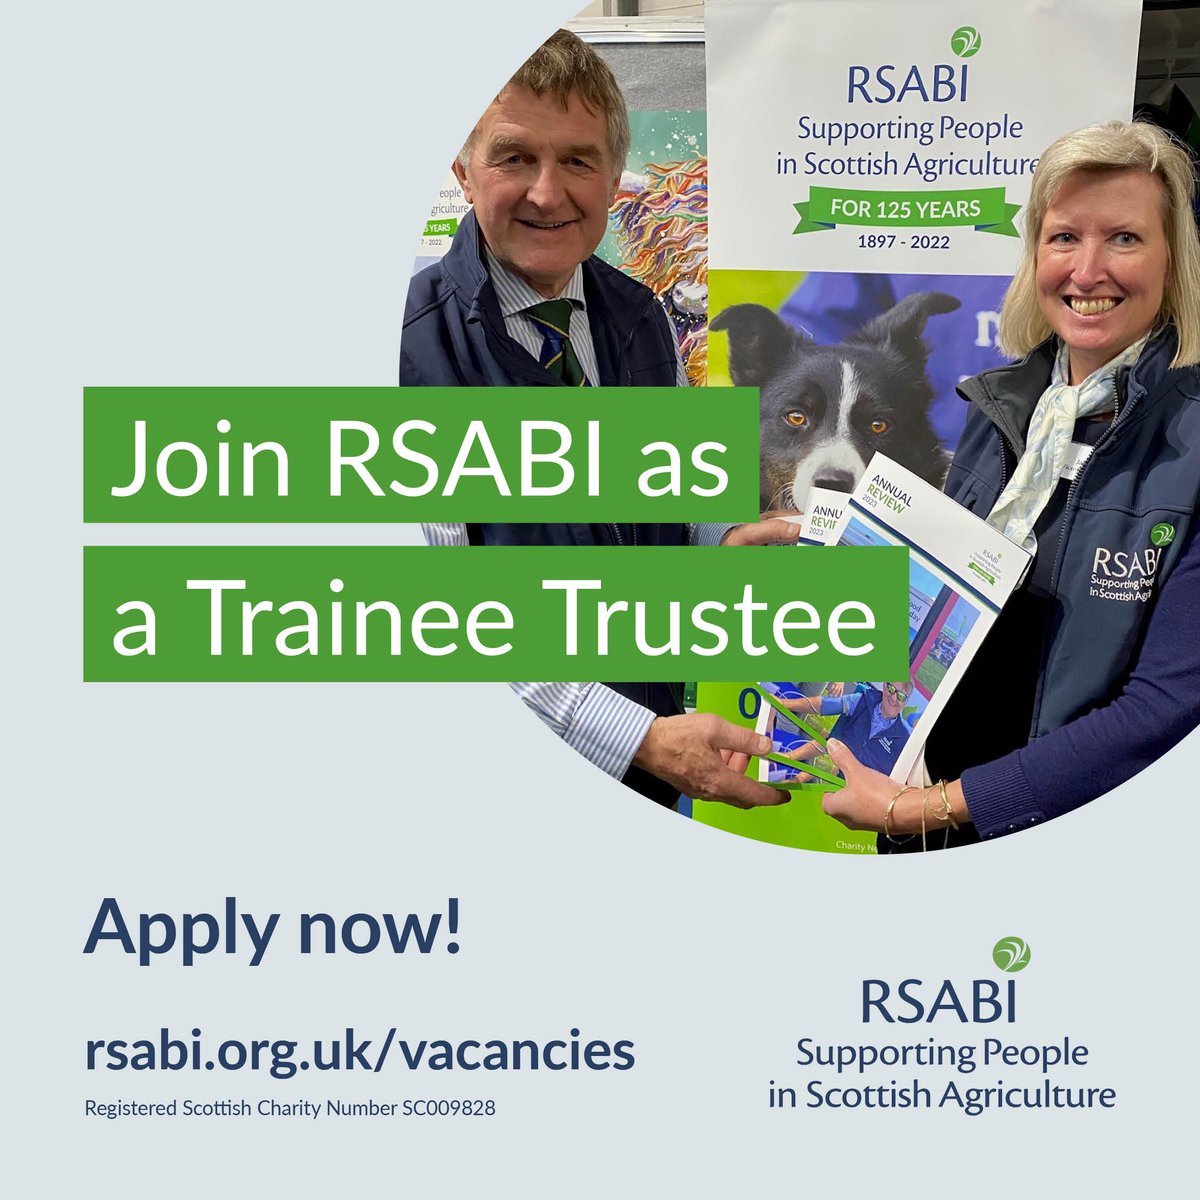 ⭐️Could you be a trainee trustee for RSABI? ⭐️ We are on the look out for two enthusiastic young people to join our board as trainee trustees from July this year for 12 months. We’re looking for people aged 25 - 45 with farming or crofting backgrounds who will shadow our trustees…